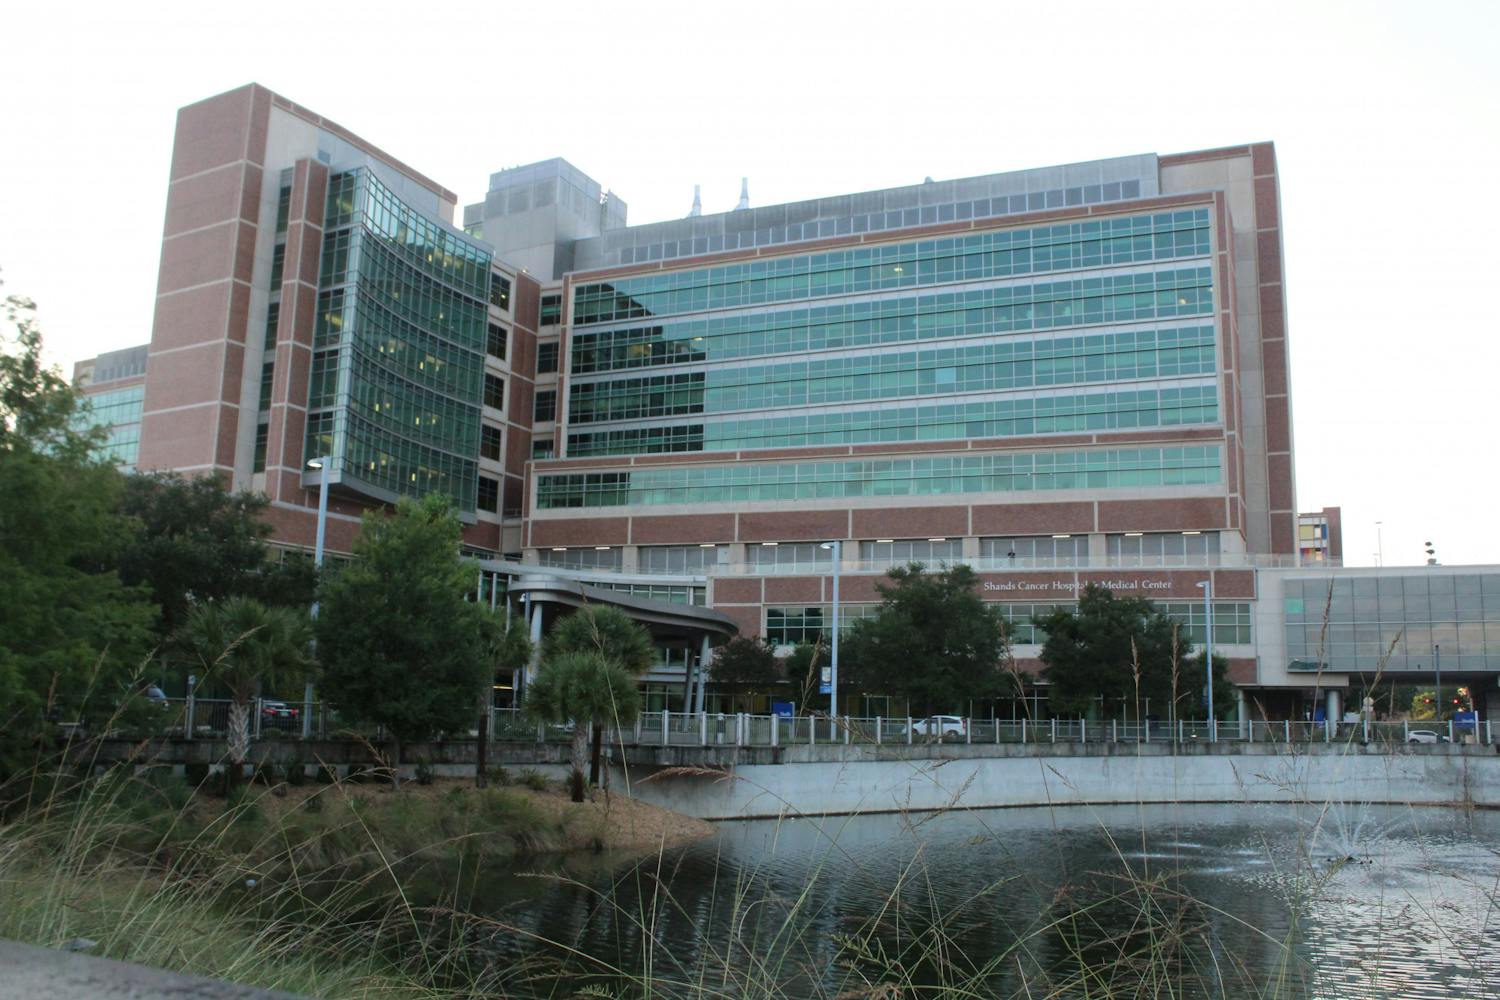 Shands Cancer Hospital and Medical Center is seen.